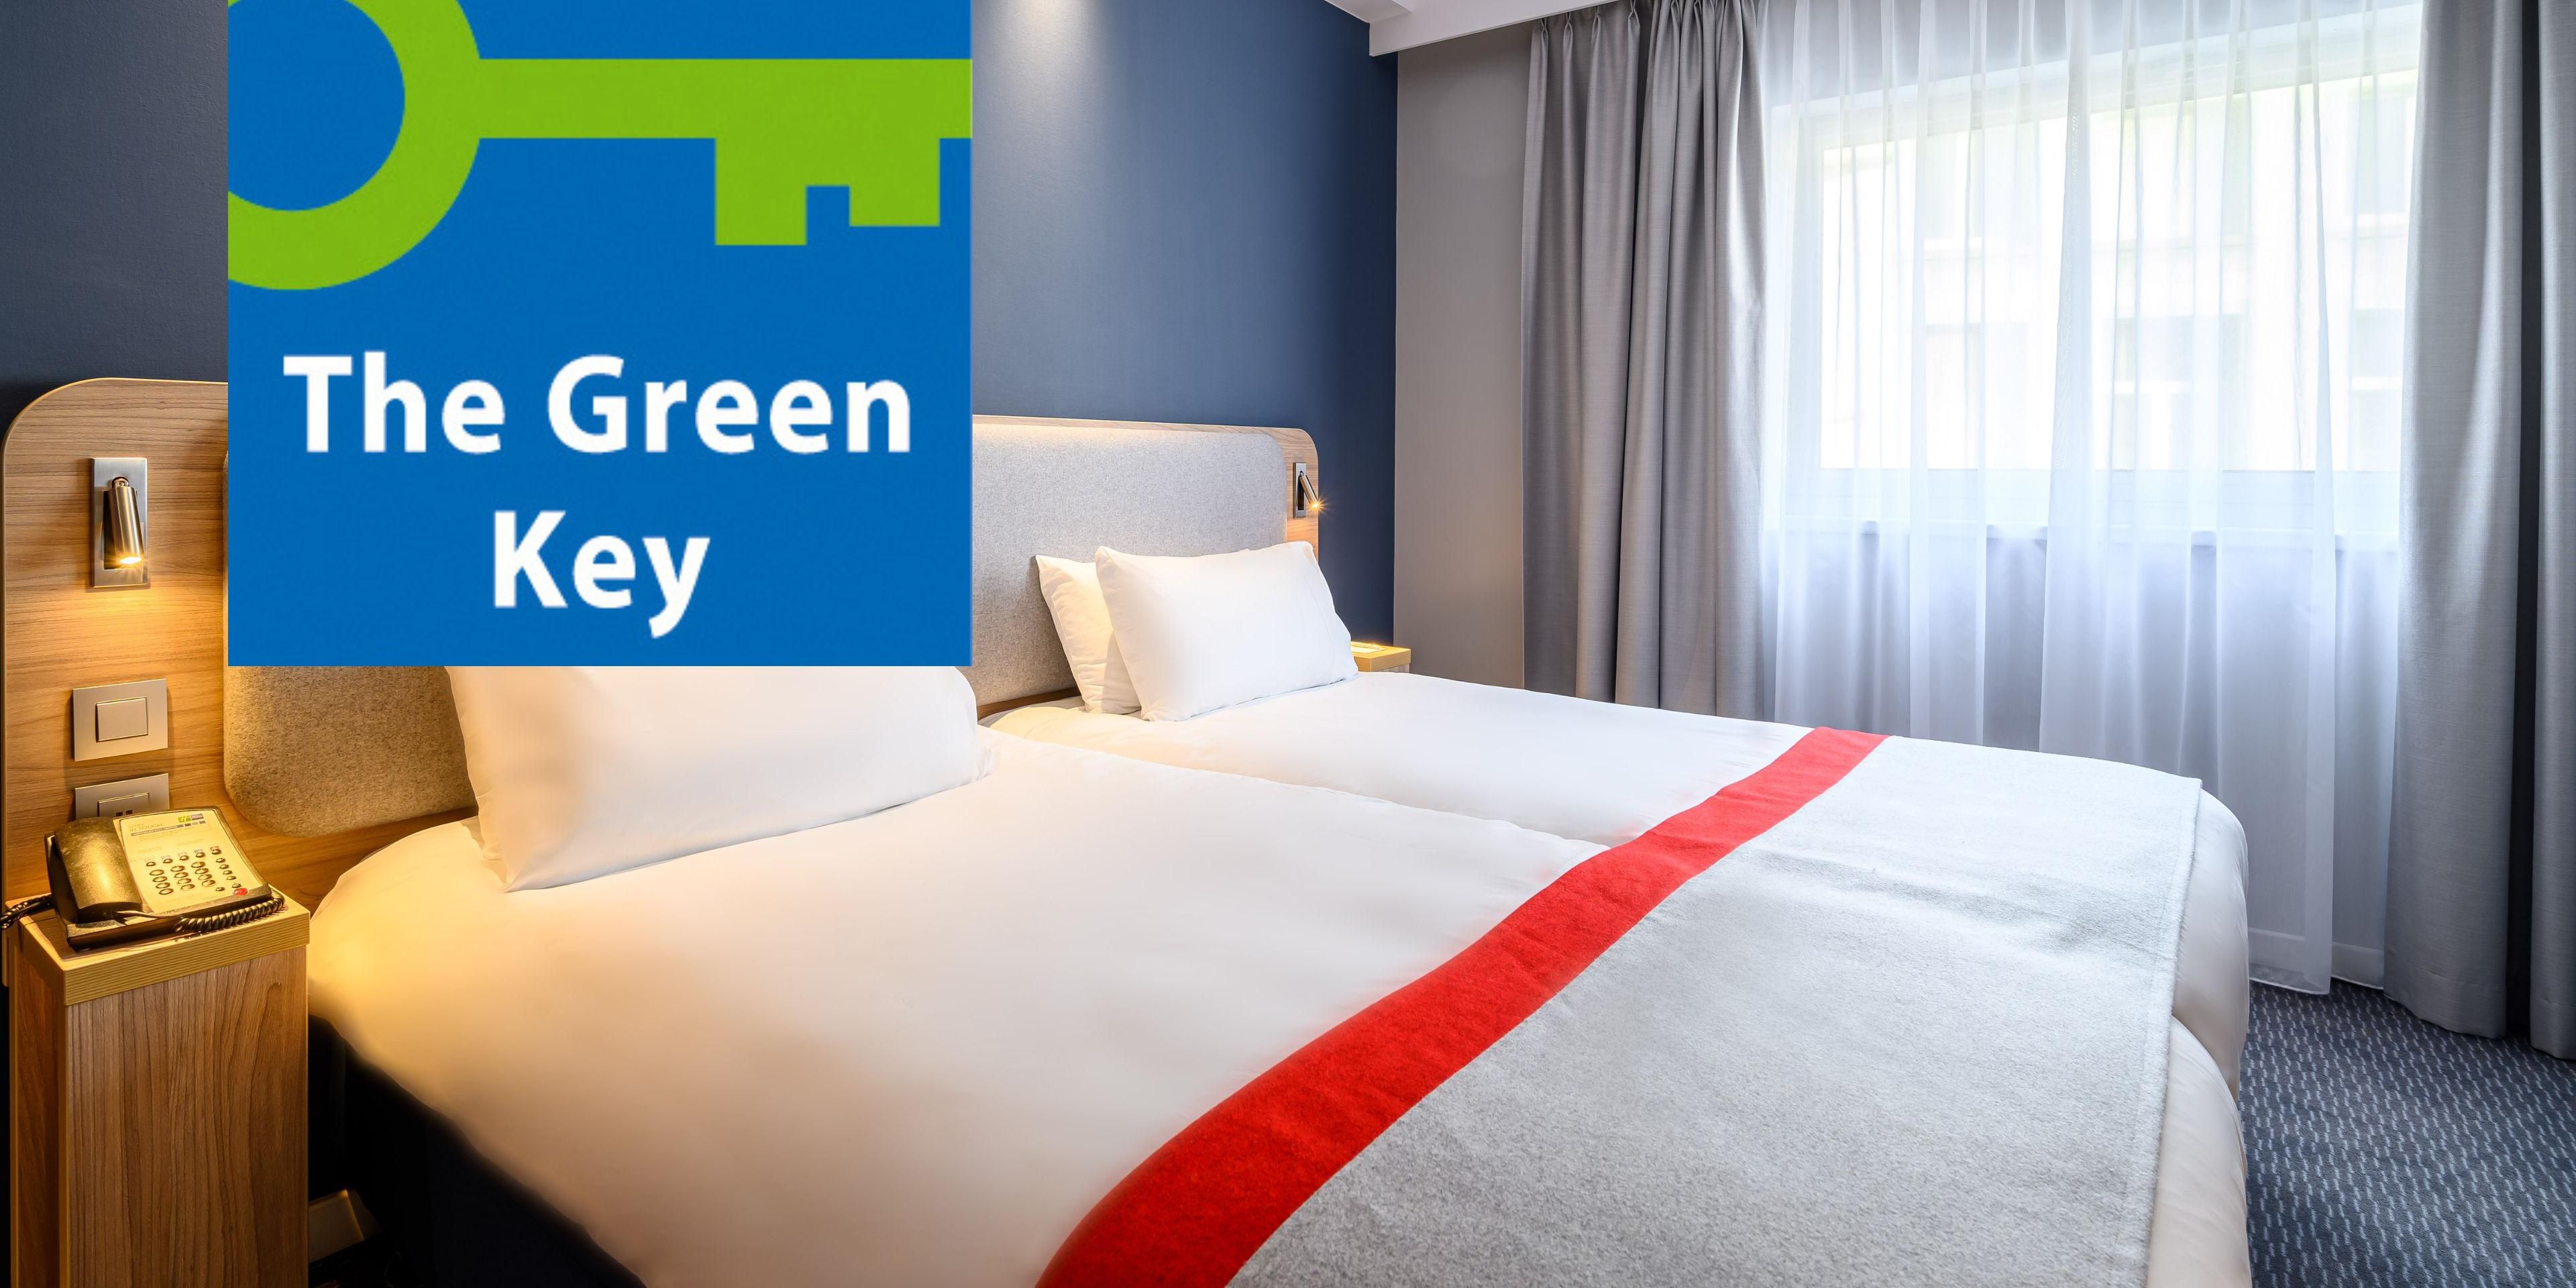 Green key is the first international quality label that promotes sustainable travel. Proud to be a certified partner and helping to make a difference on an environmental level, without compromising on comfort or affordability.